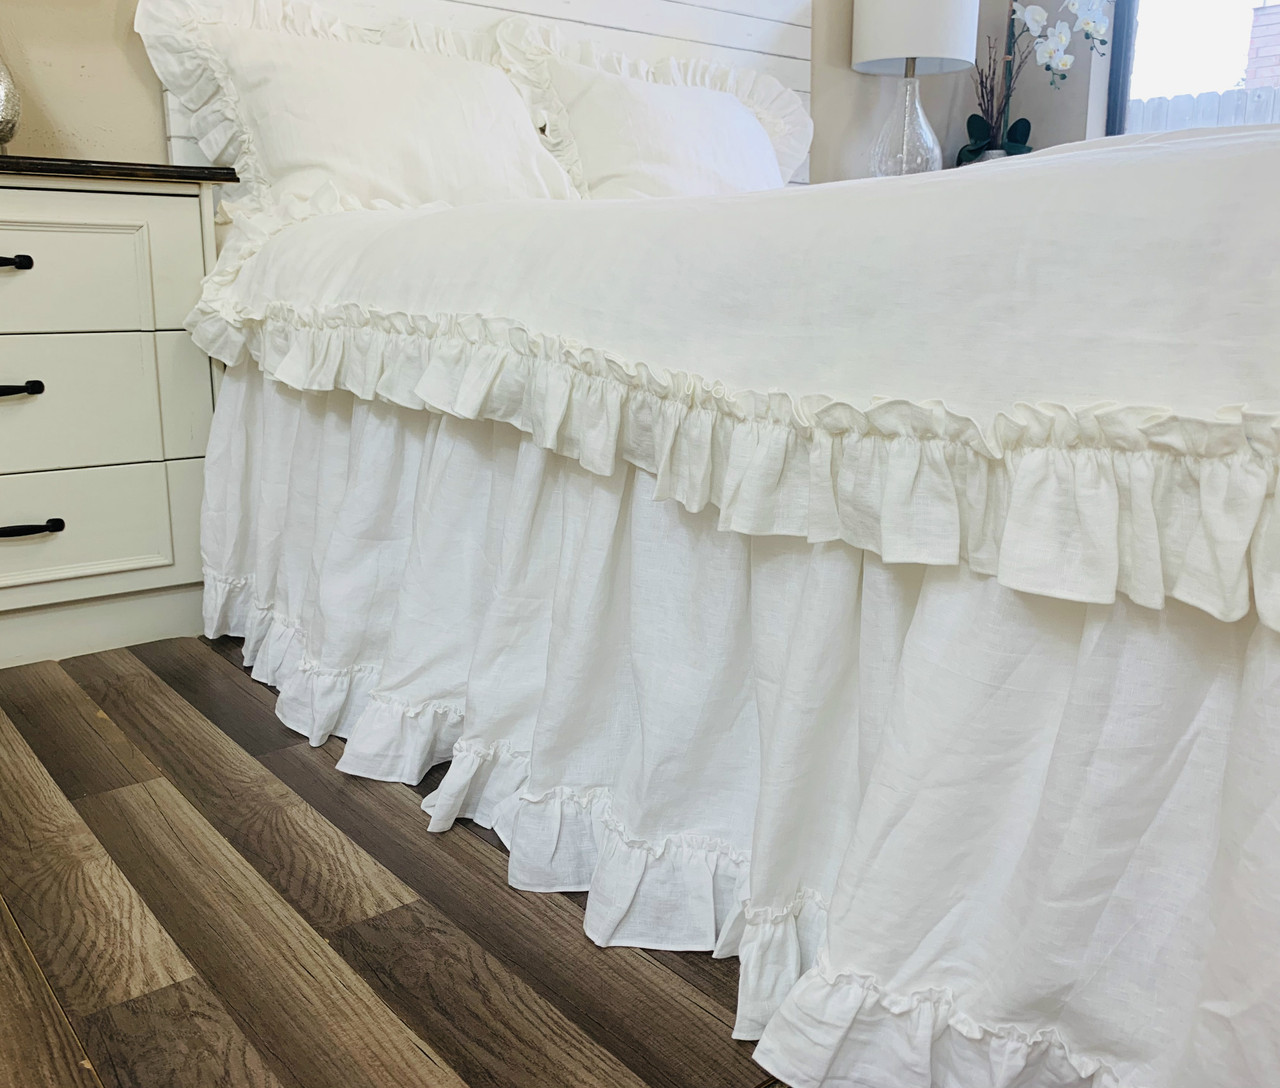 https://cdn11.bigcommerce.com/s-gp626m/images/stencil/1280x1280/products/257/11120/White_Linen_Bed_Skirt_with_Country_Ruffles_7__31121.1570048366.jpg?c=2